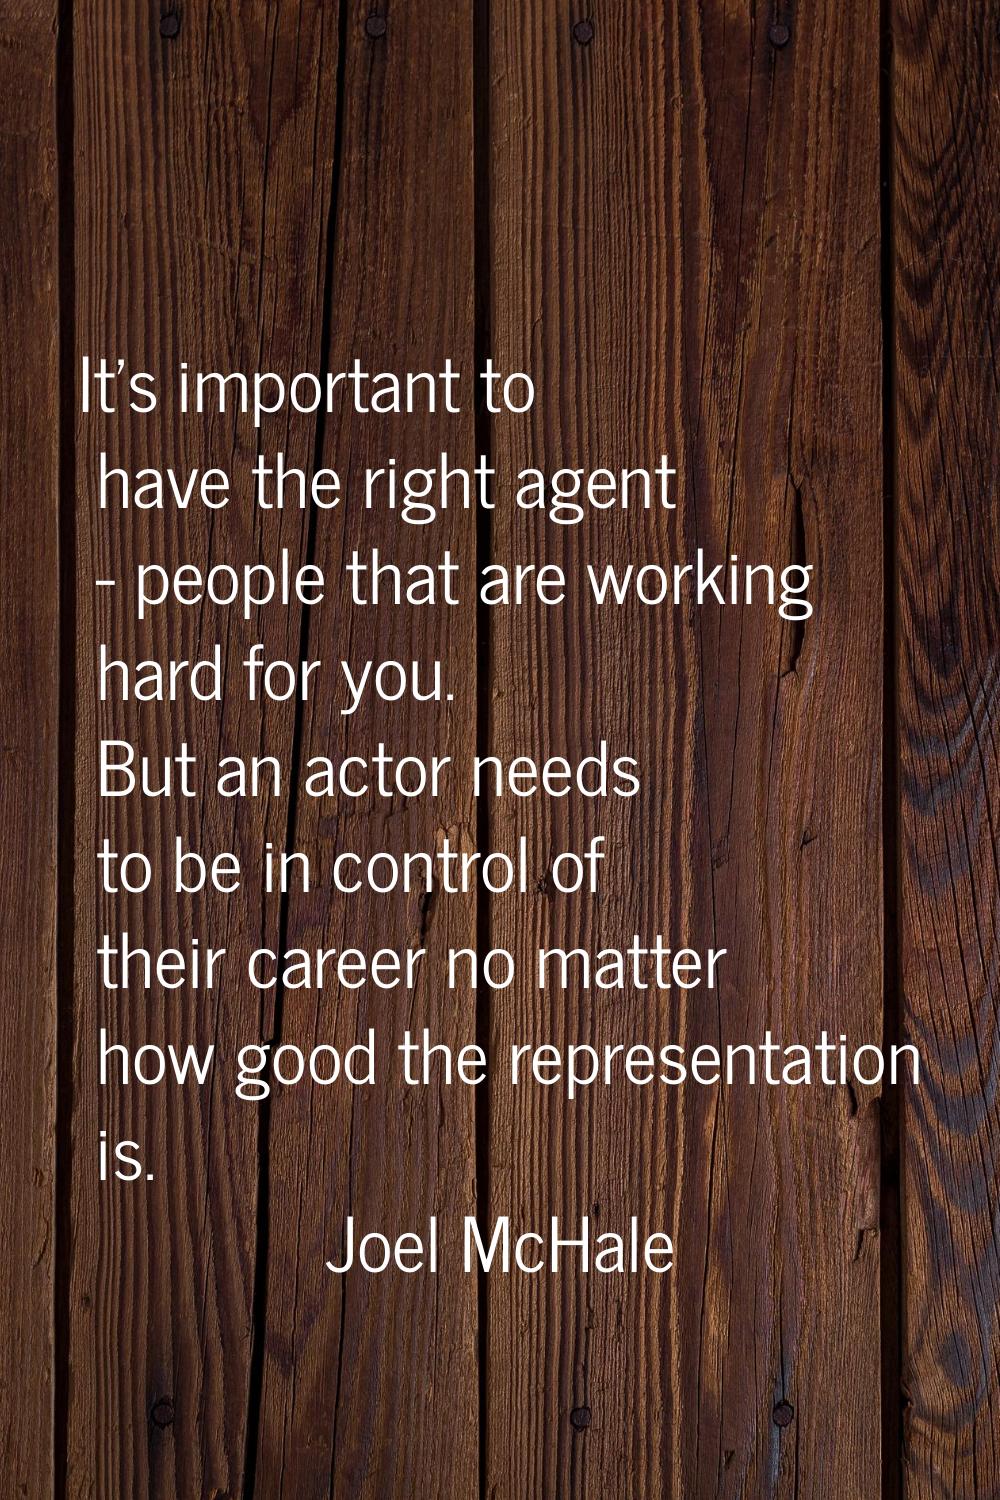 It's important to have the right agent - people that are working hard for you. But an actor needs t